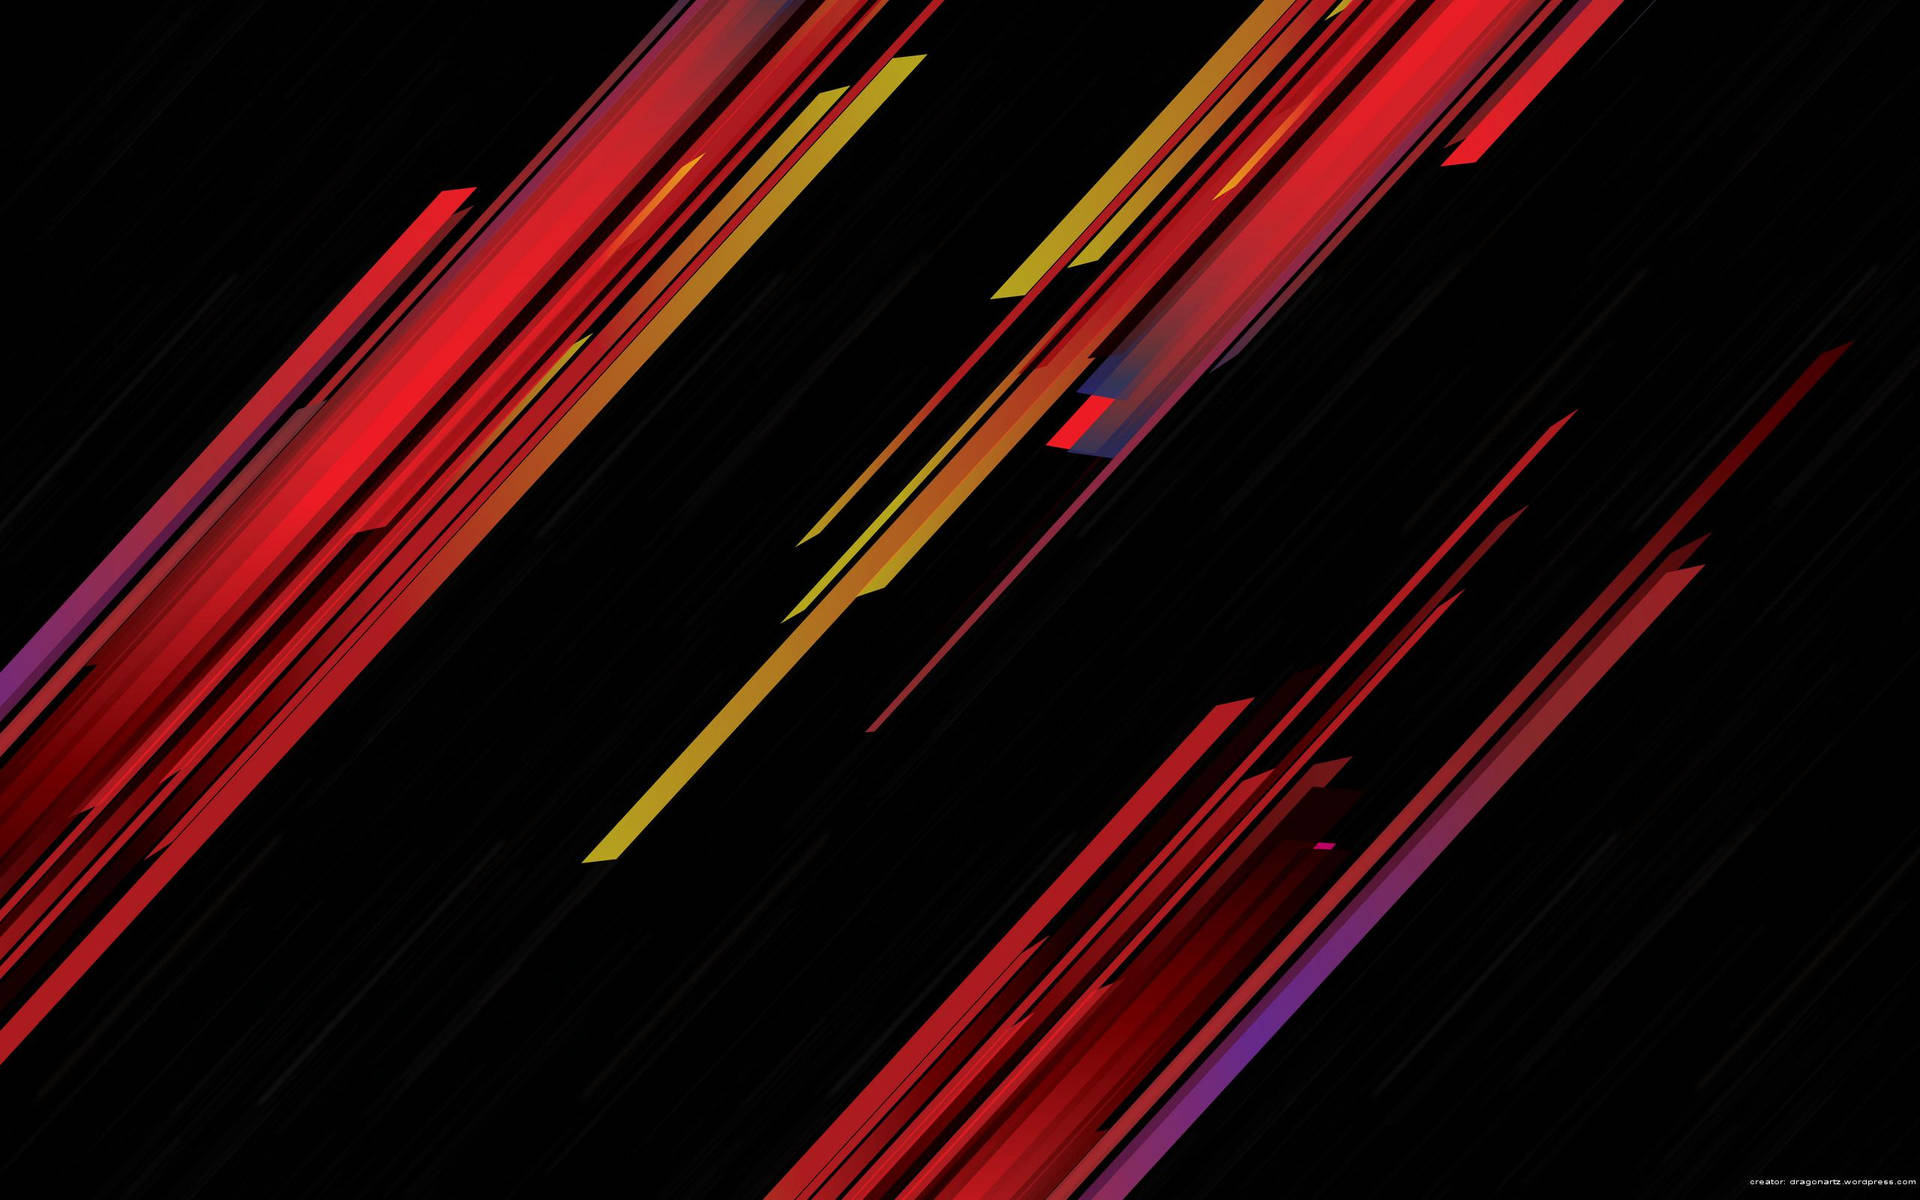 Free Amoled Wallpaper Downloads, [300+] Amoled Wallpapers for FREE |  